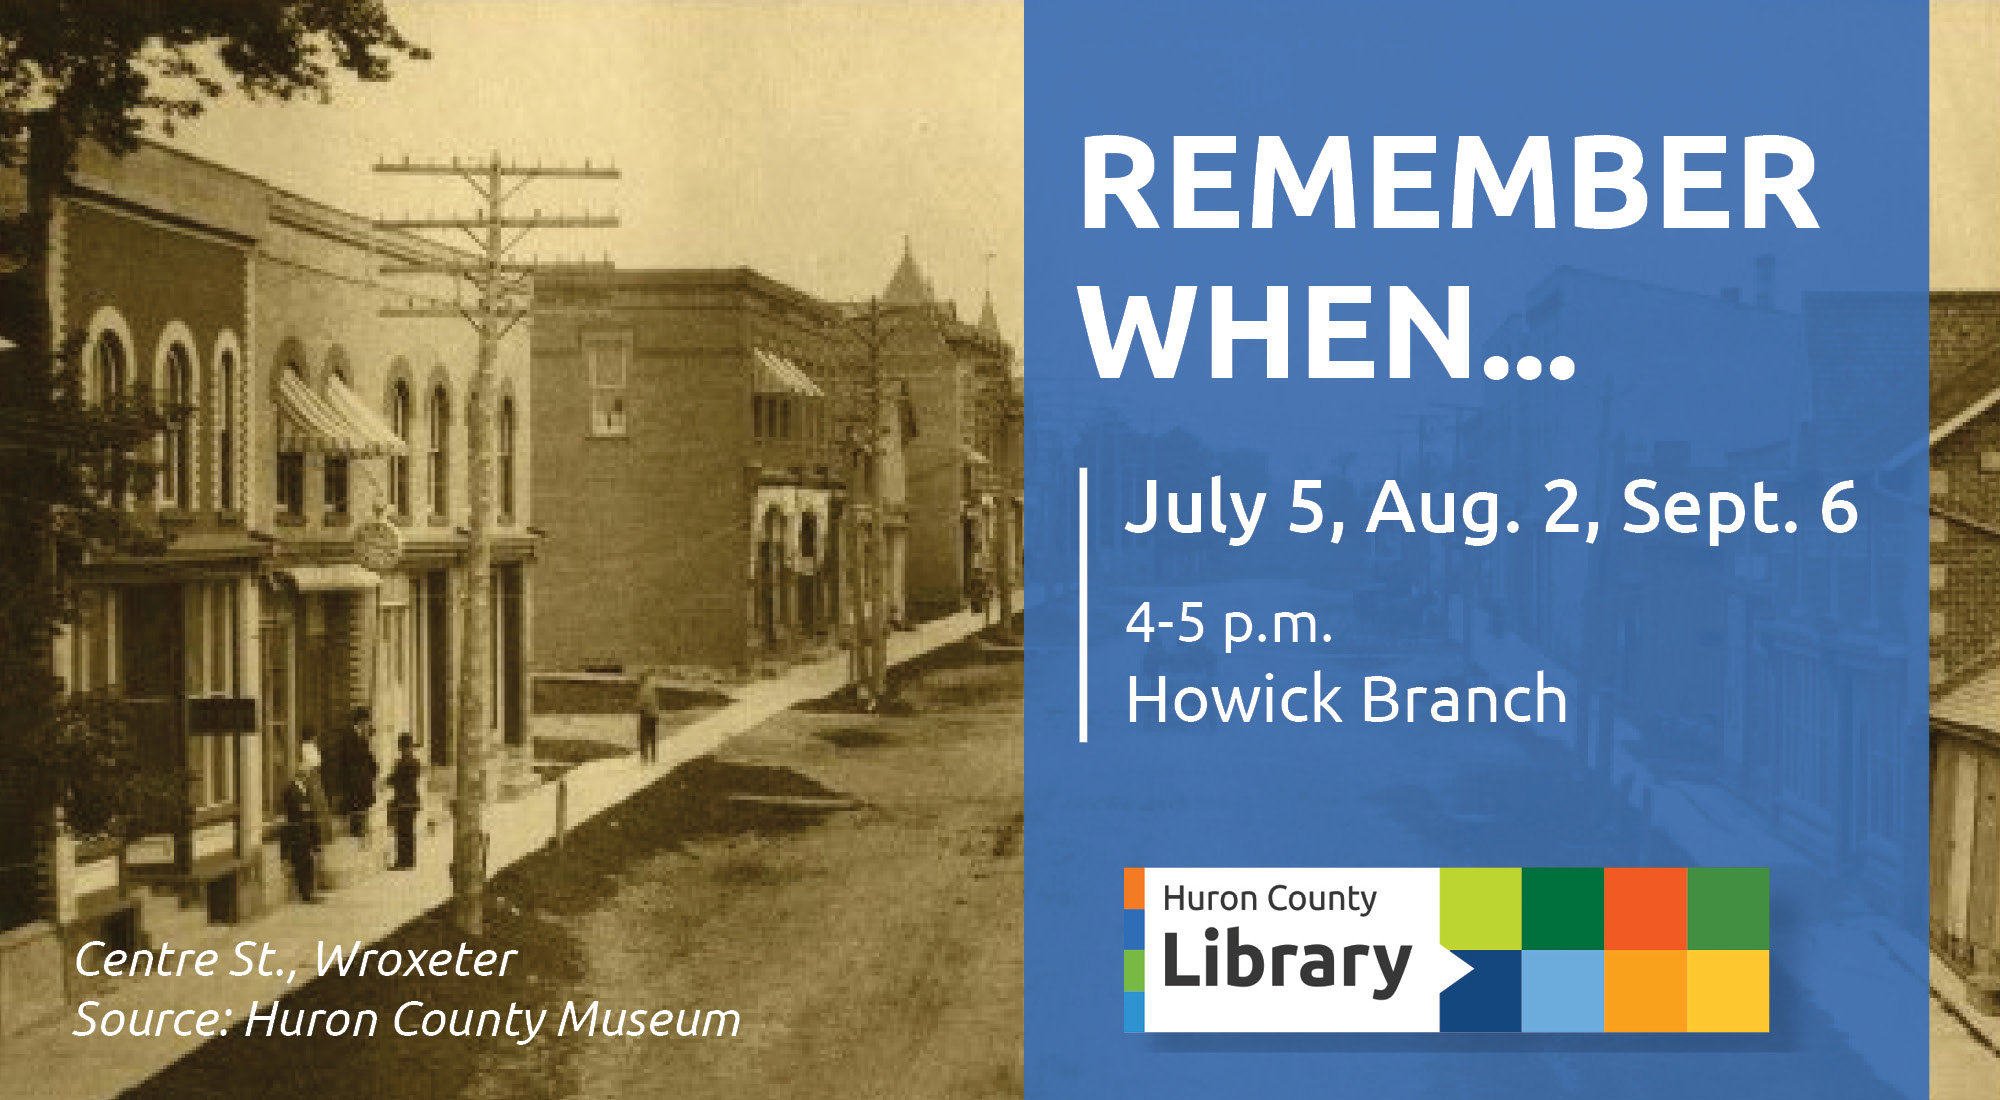 Historic image of Centre Street, Wroxeter, with text promoting Remember When at the Howick Branch